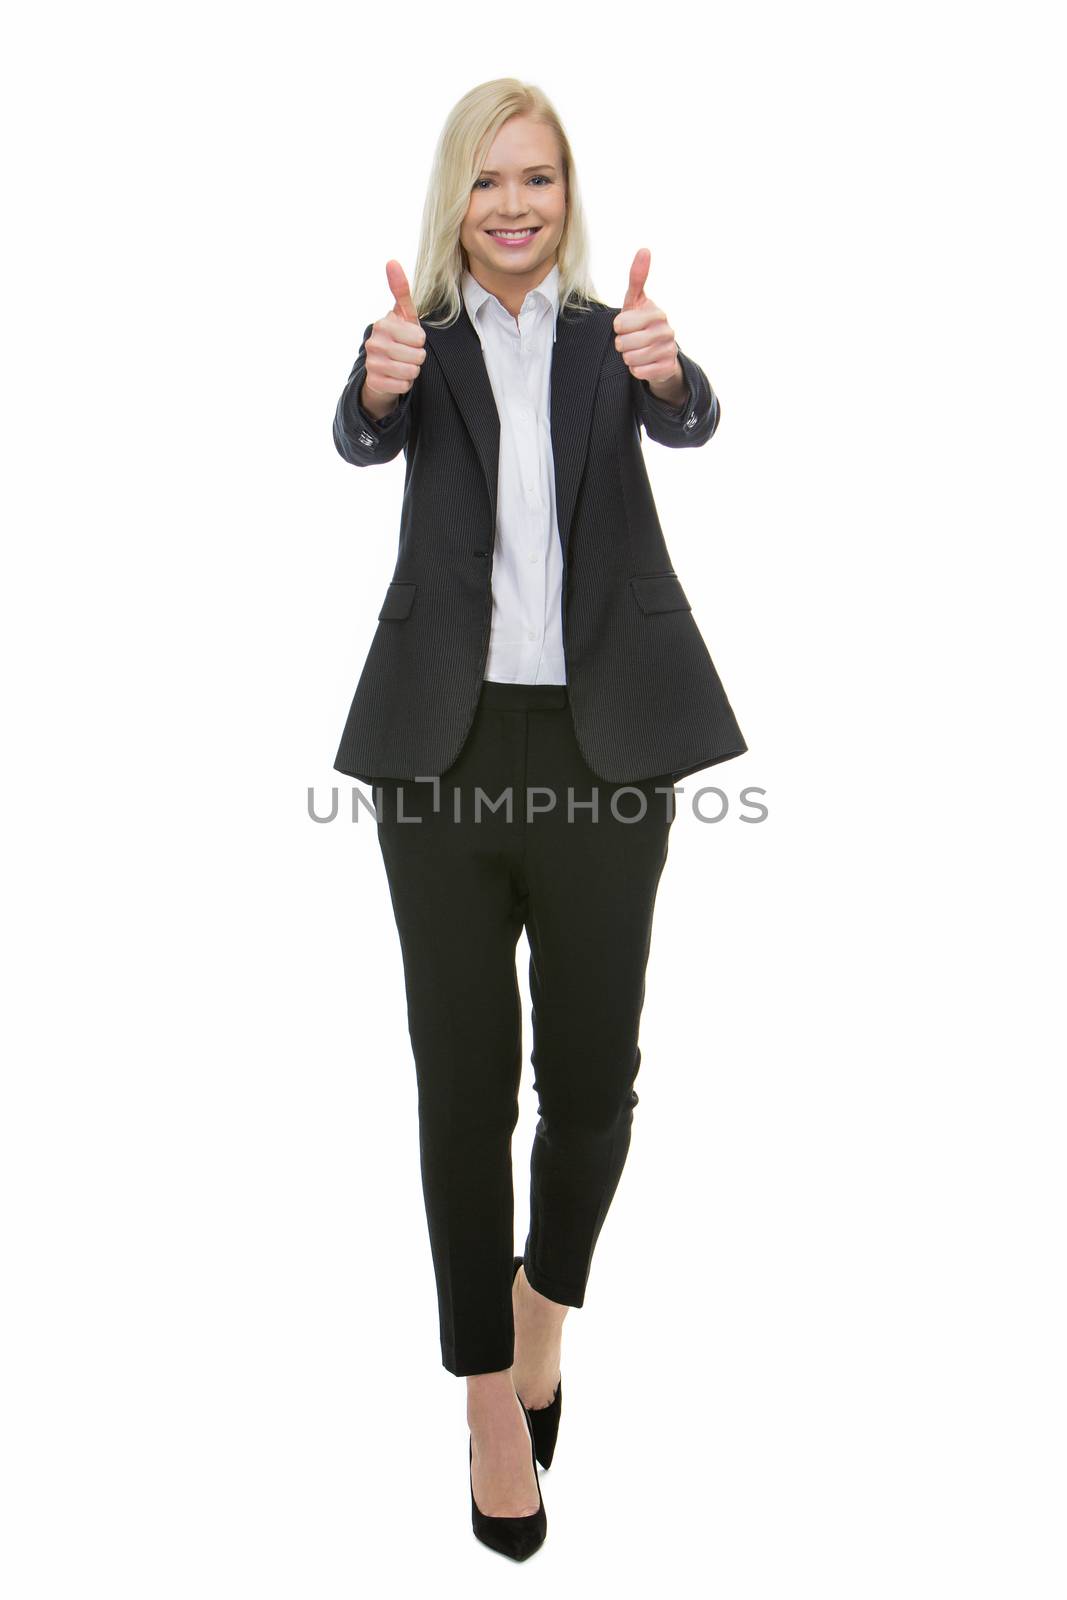 businesswoman thumbs up by Flareimage